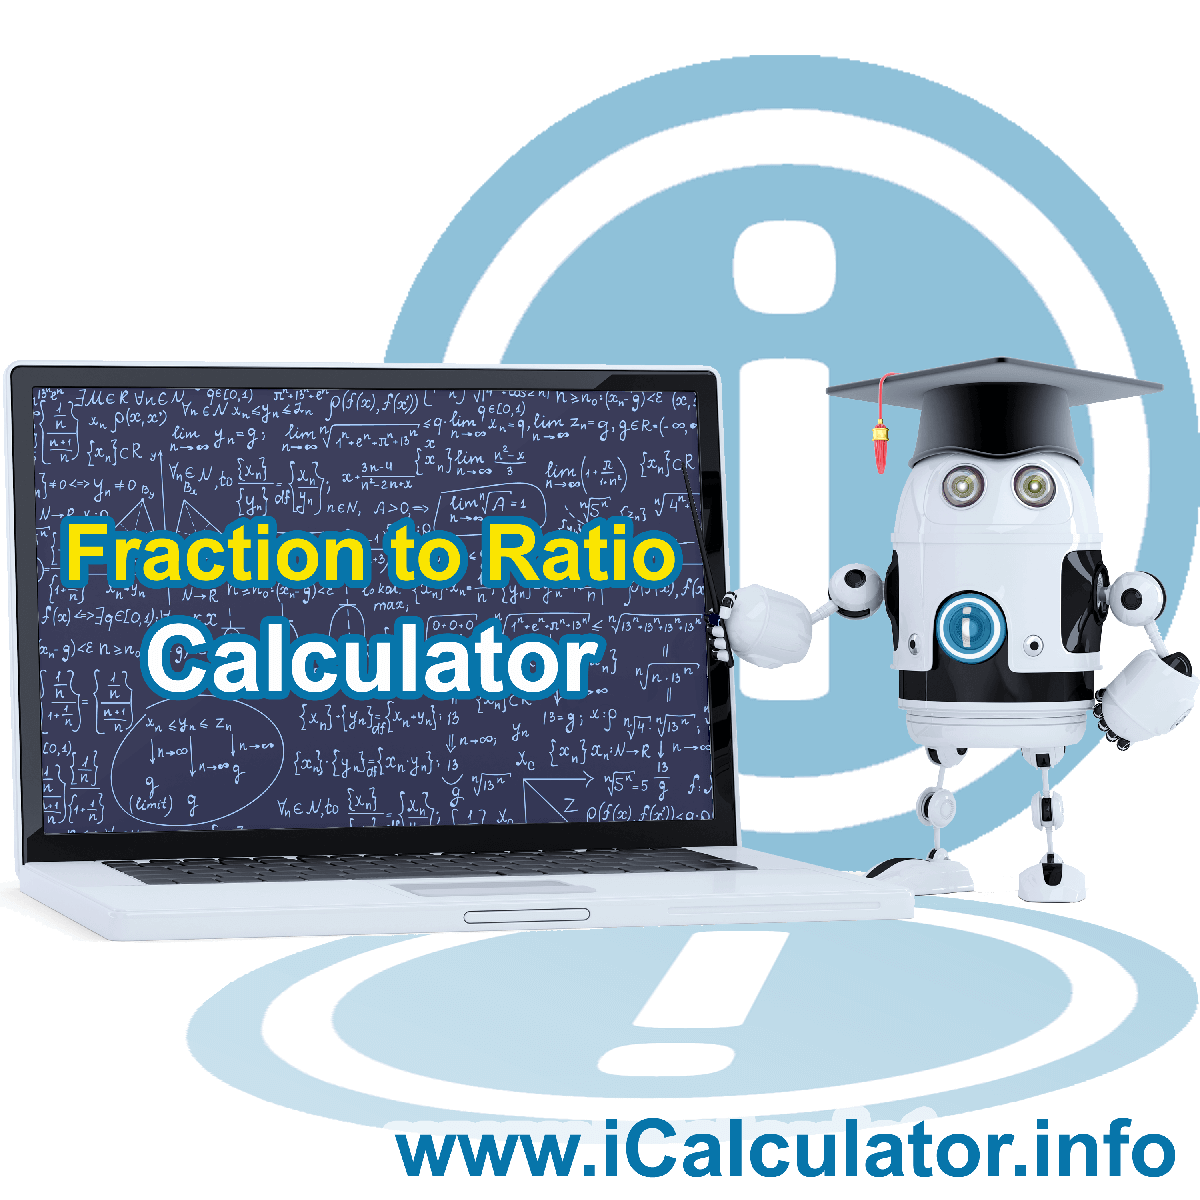 Fraction To Ratio. This image shows the properties and fraction to ratio formula for the Fraction To Ratio